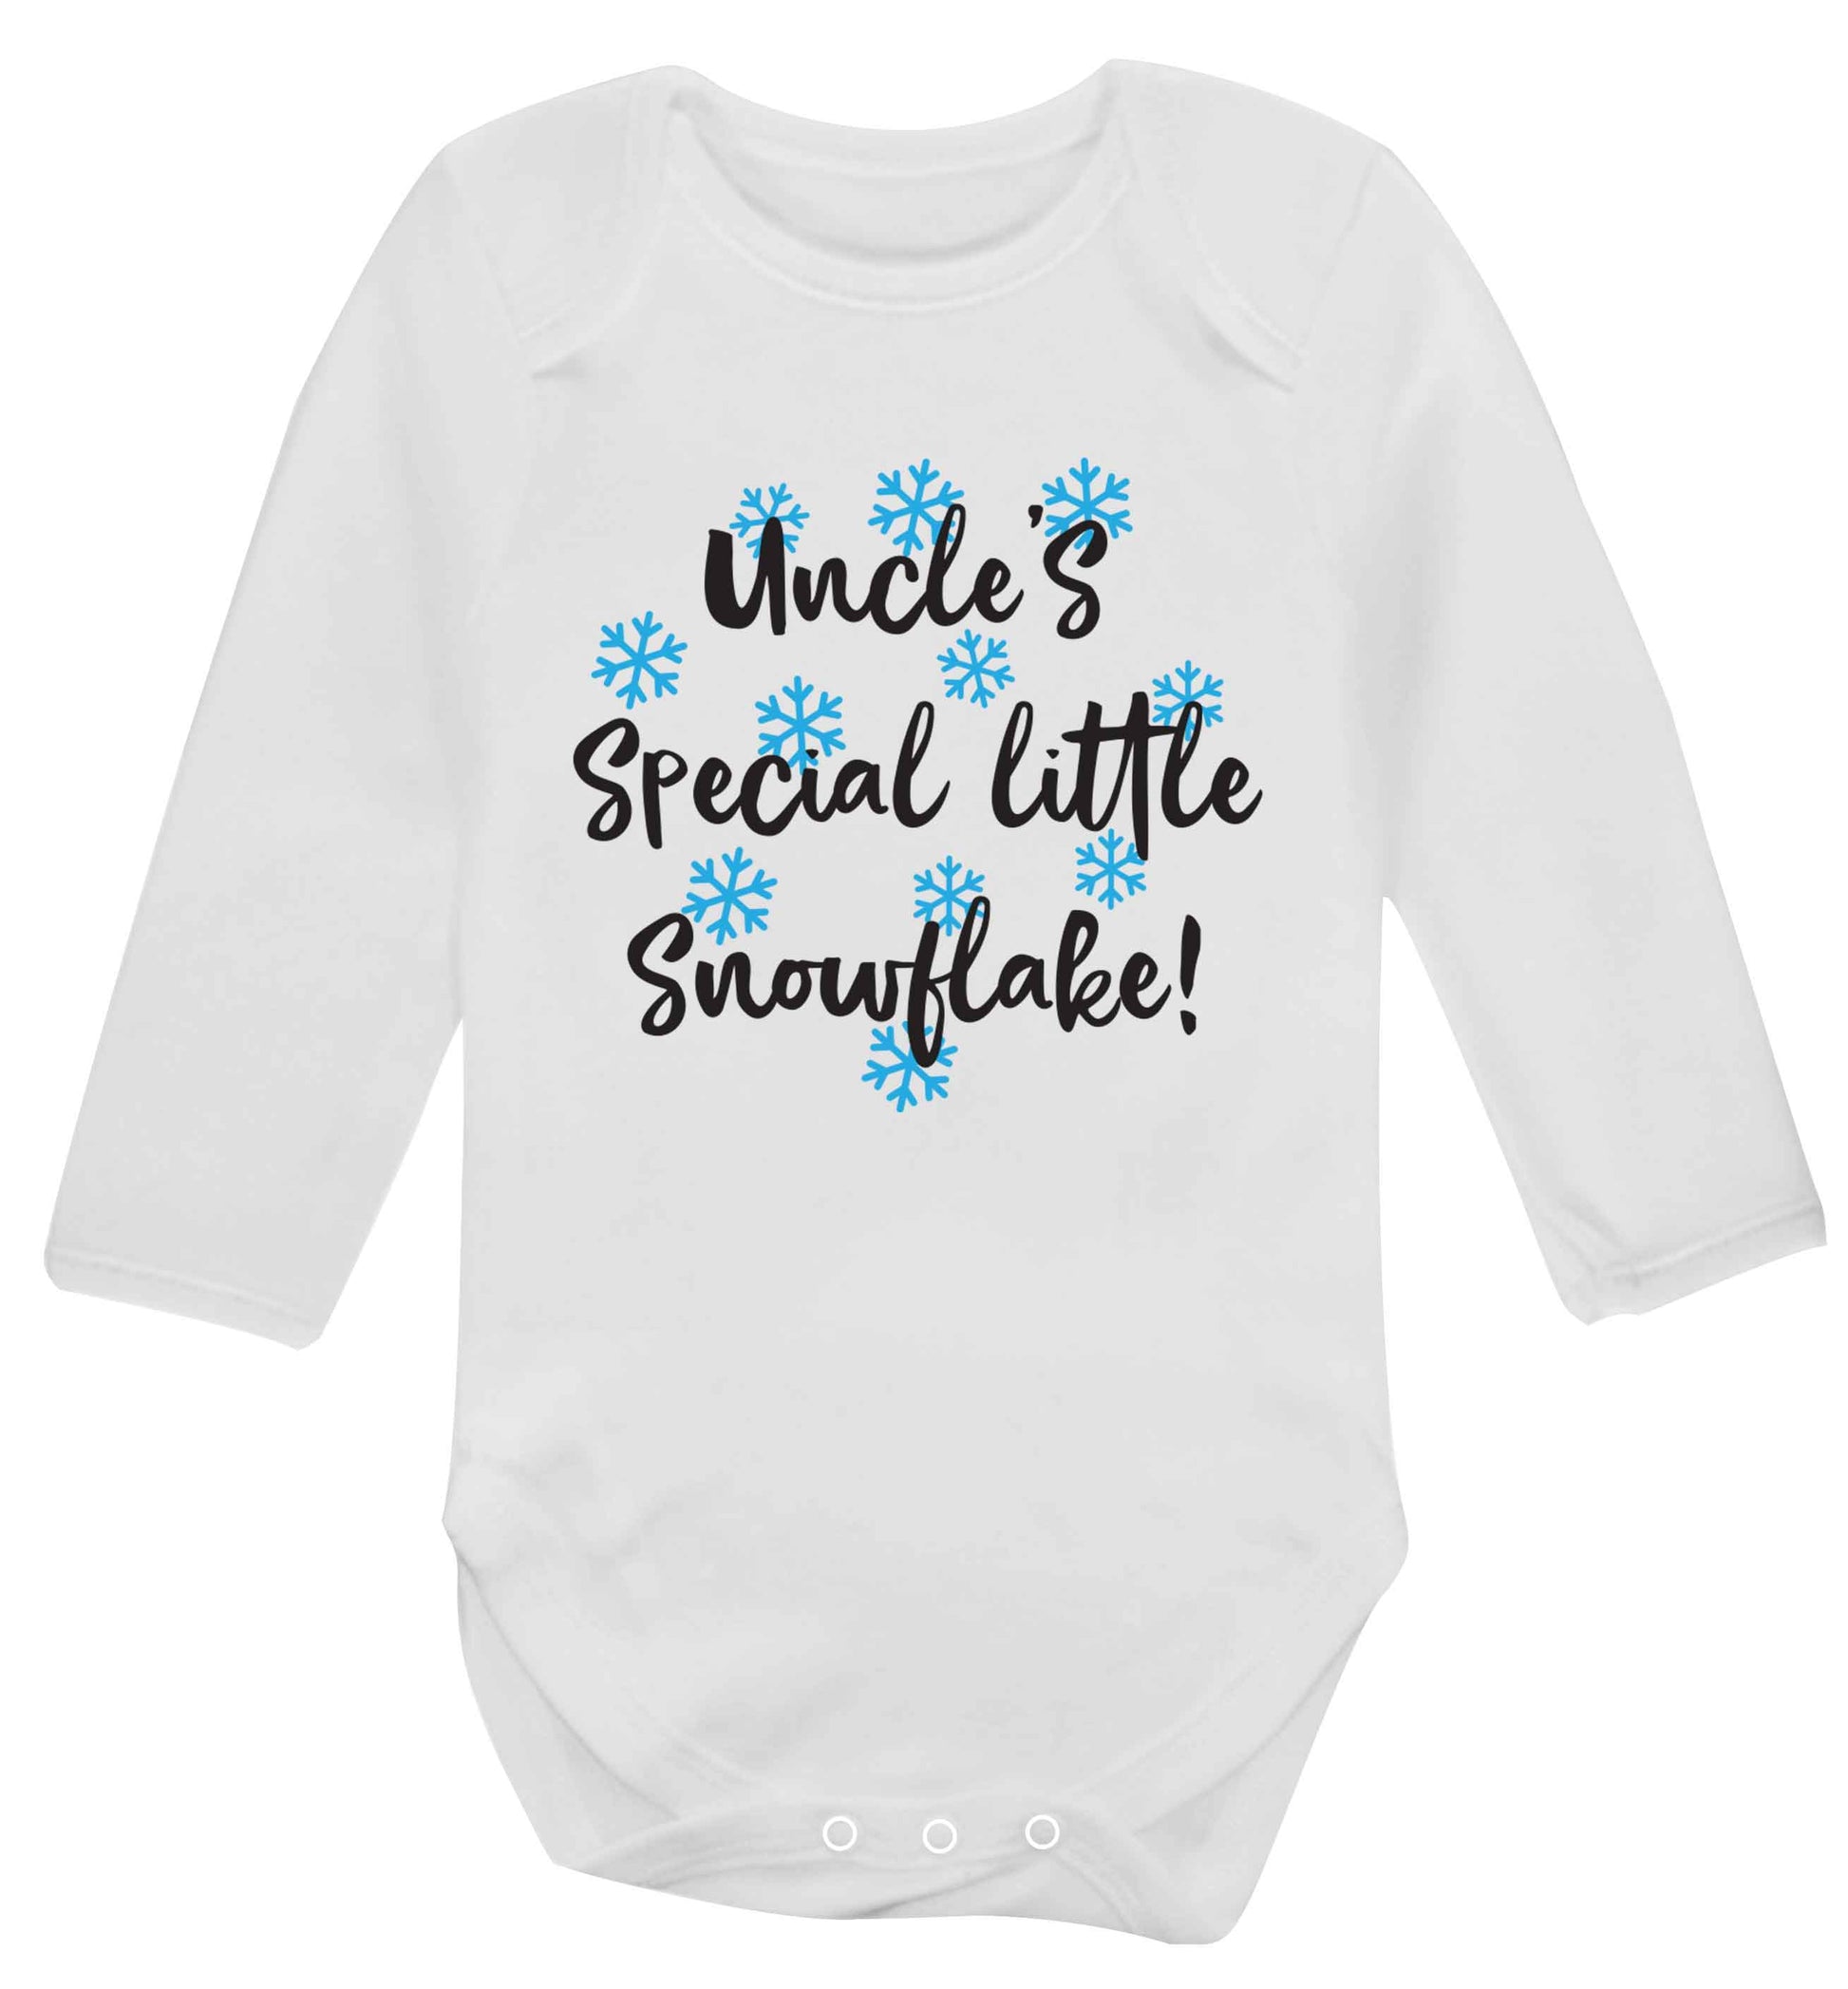 Uncle's special little snowflake Baby Vest long sleeved white 6-12 months